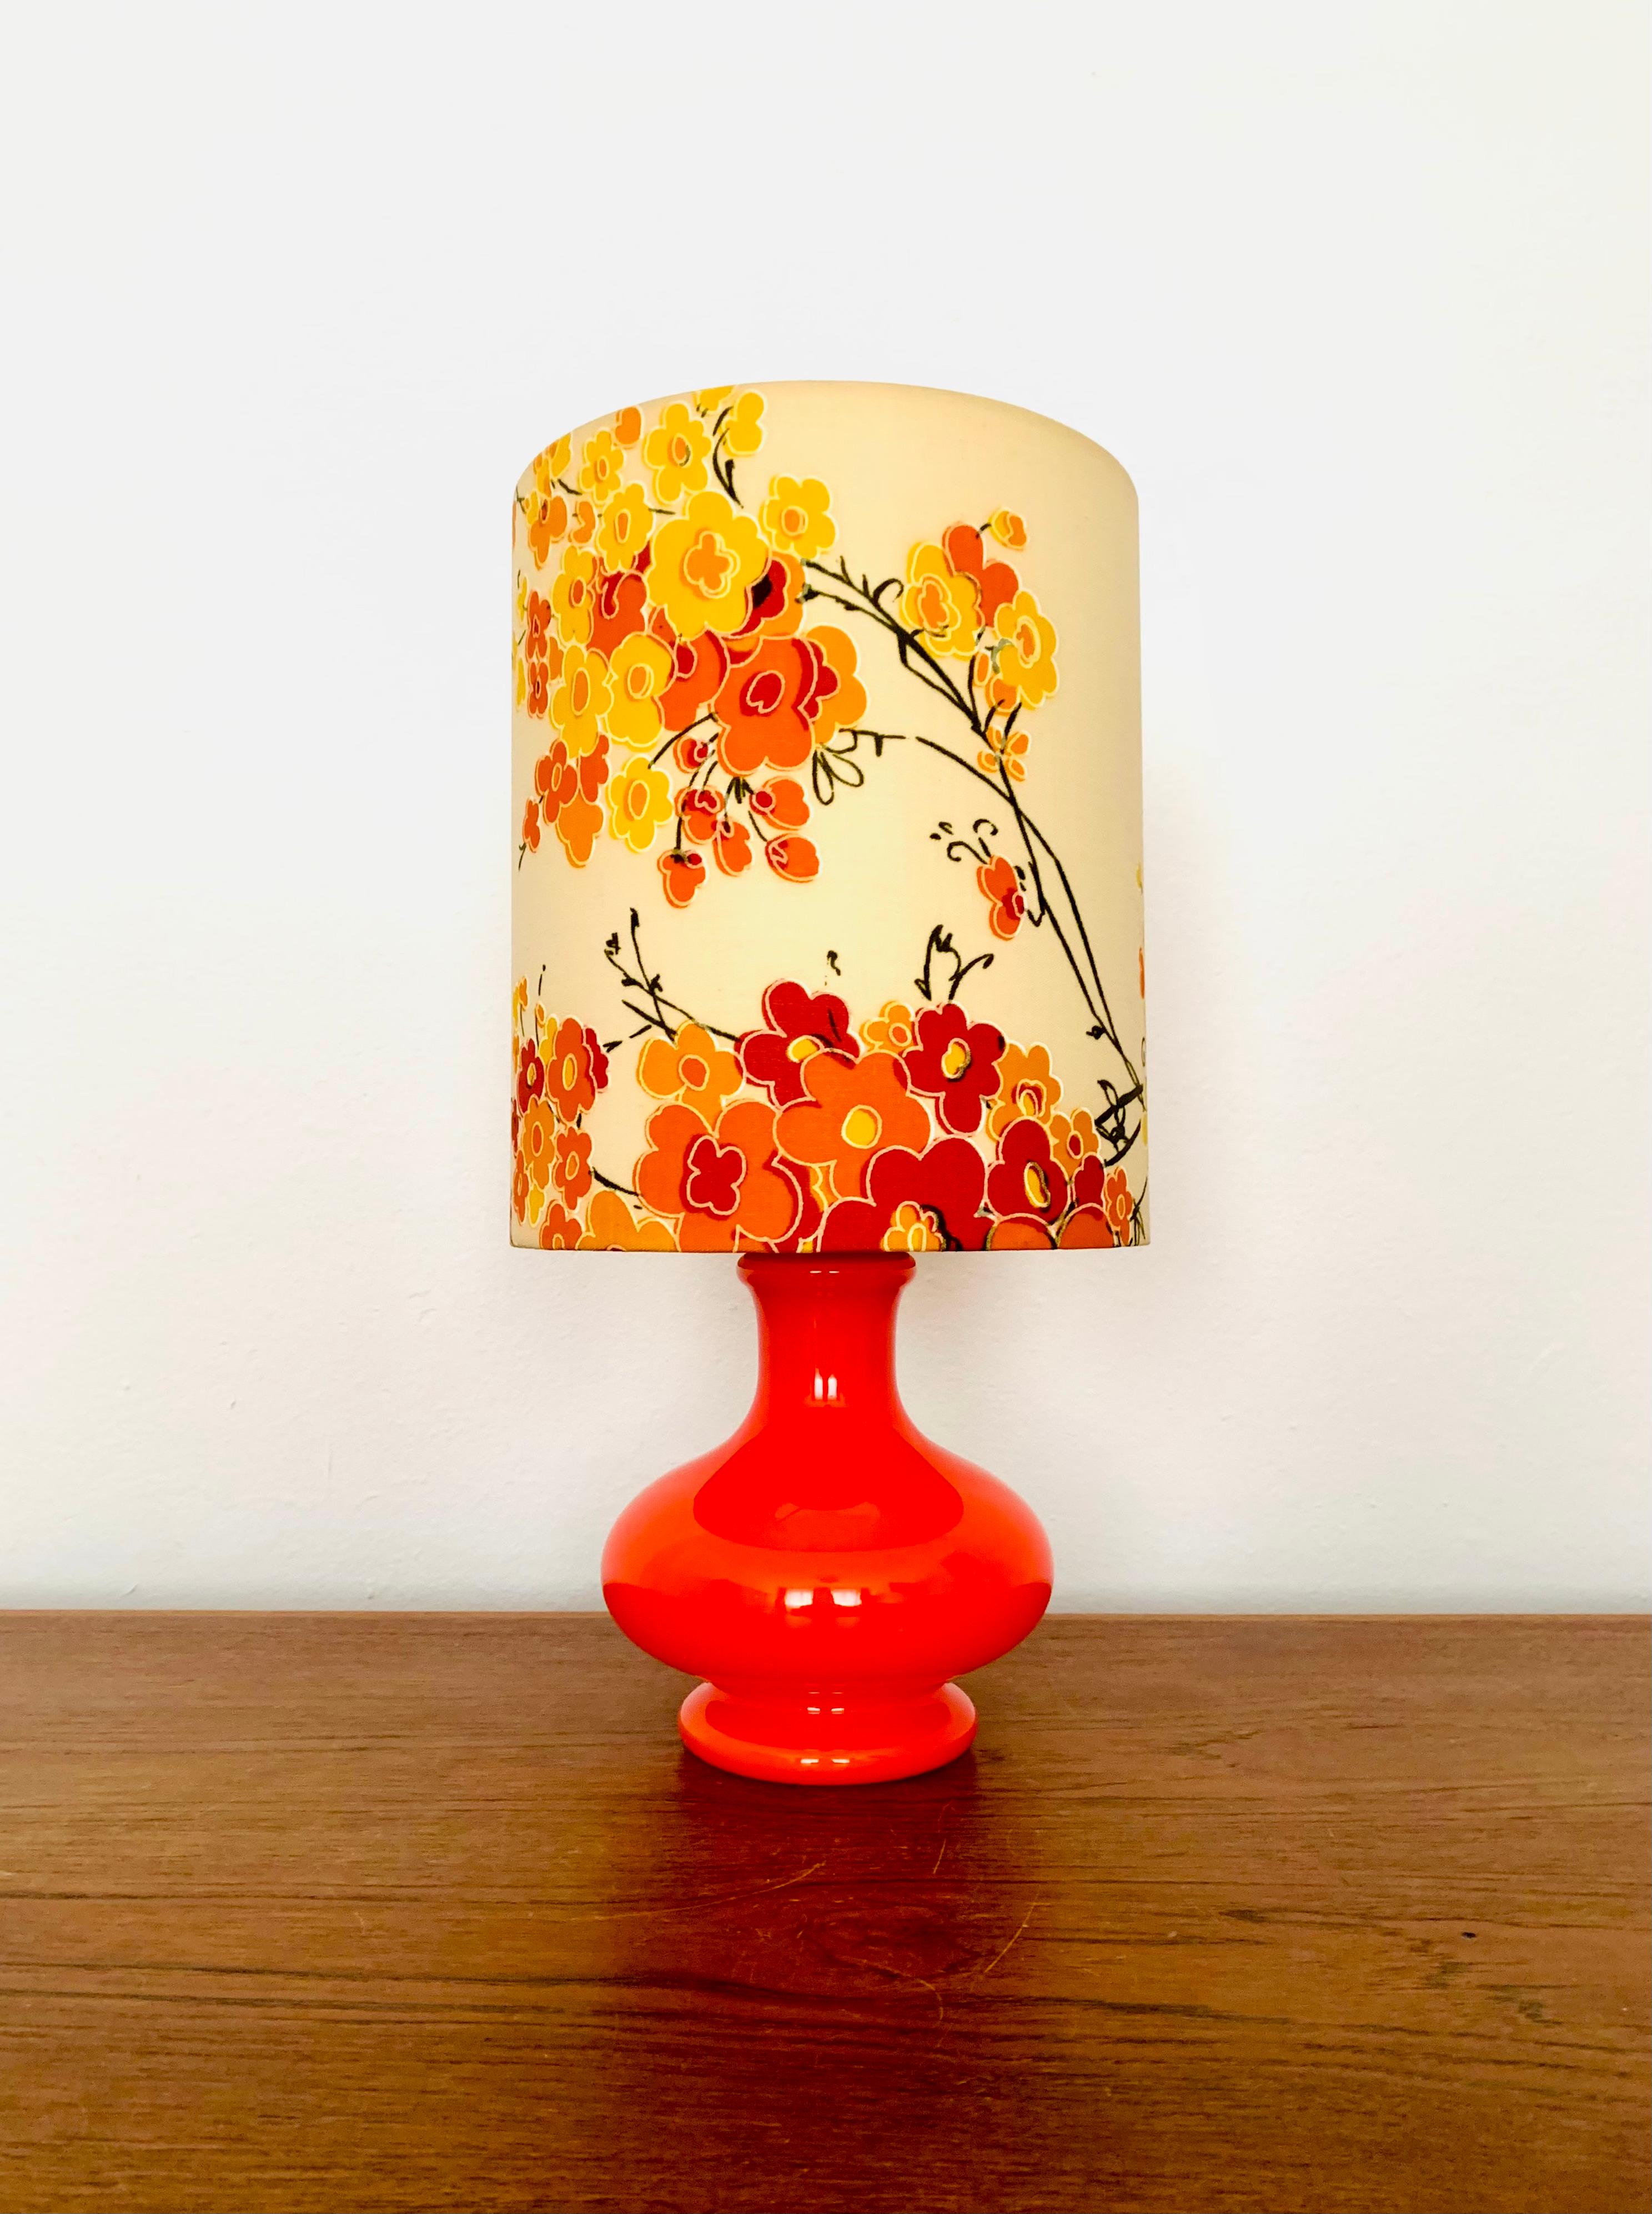 Lovely glass table lamp from the 1960s.
The lamp is very noble and a very special design object.
The illuminated glass base creates a great light.

Condition:

Very good vintage condition with signs of wear consistent with age.
Slight signs of wear